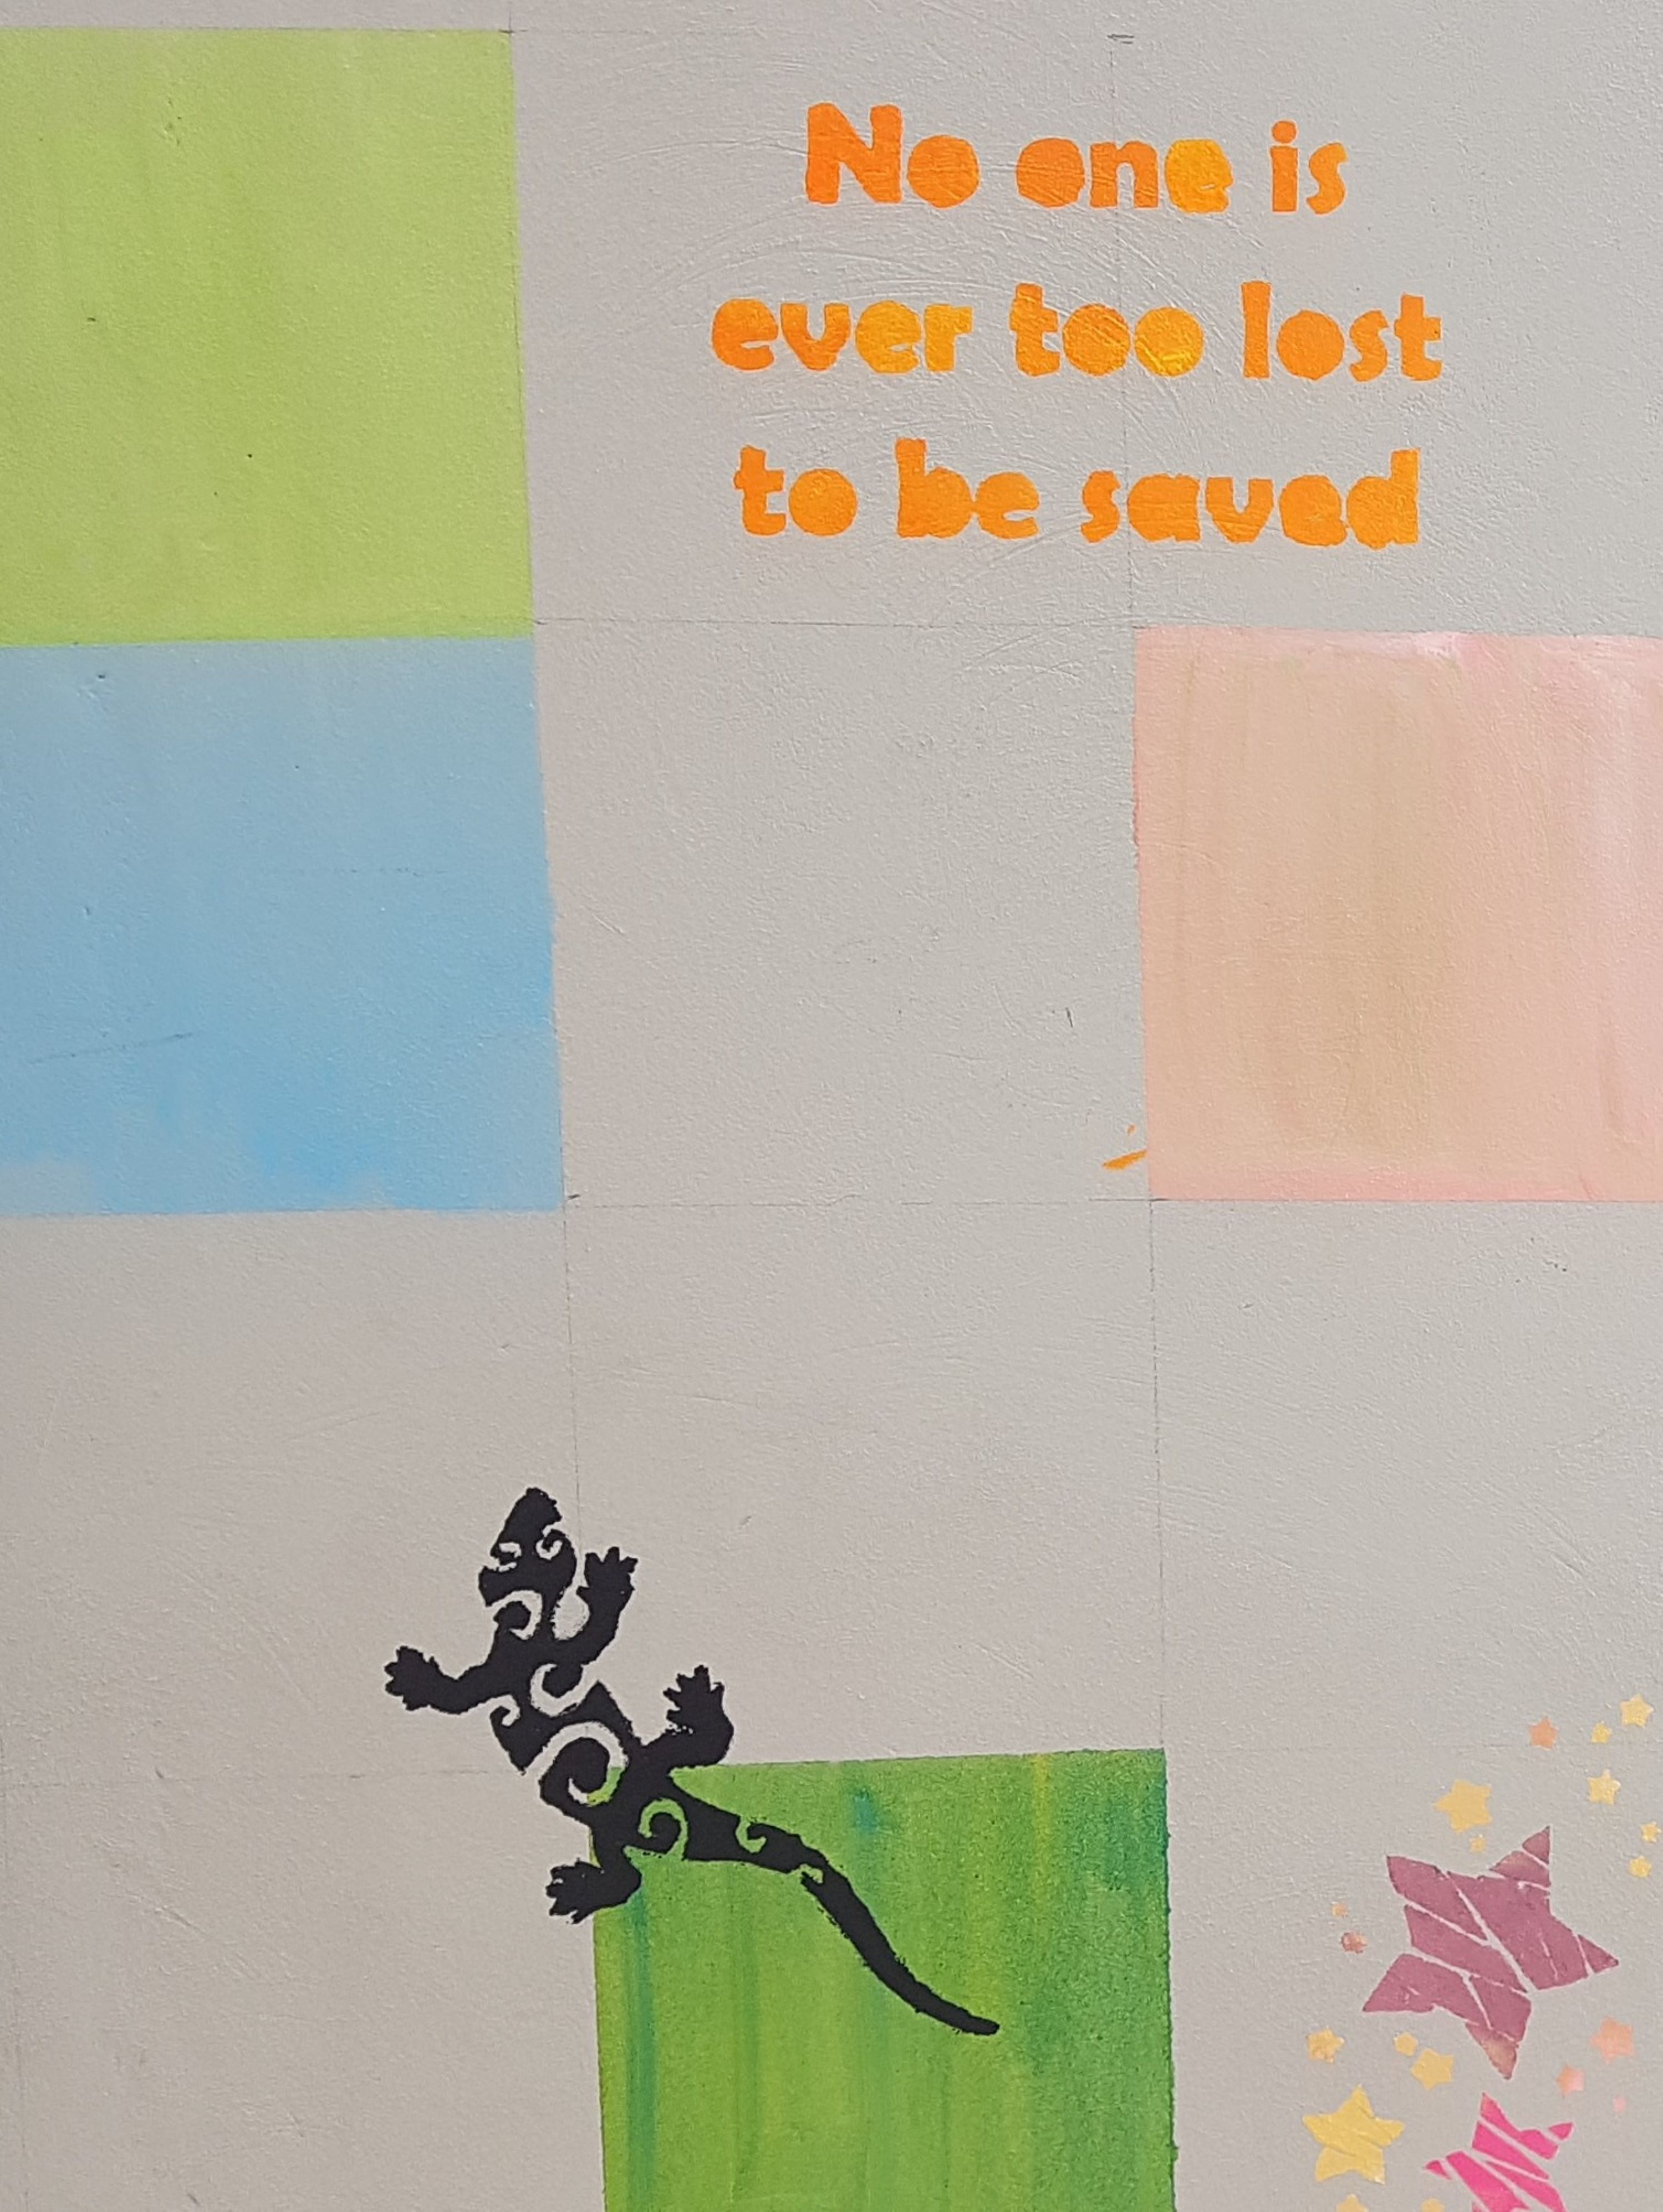 Wandbild mit Spruch: No one is ever too lost to be solved